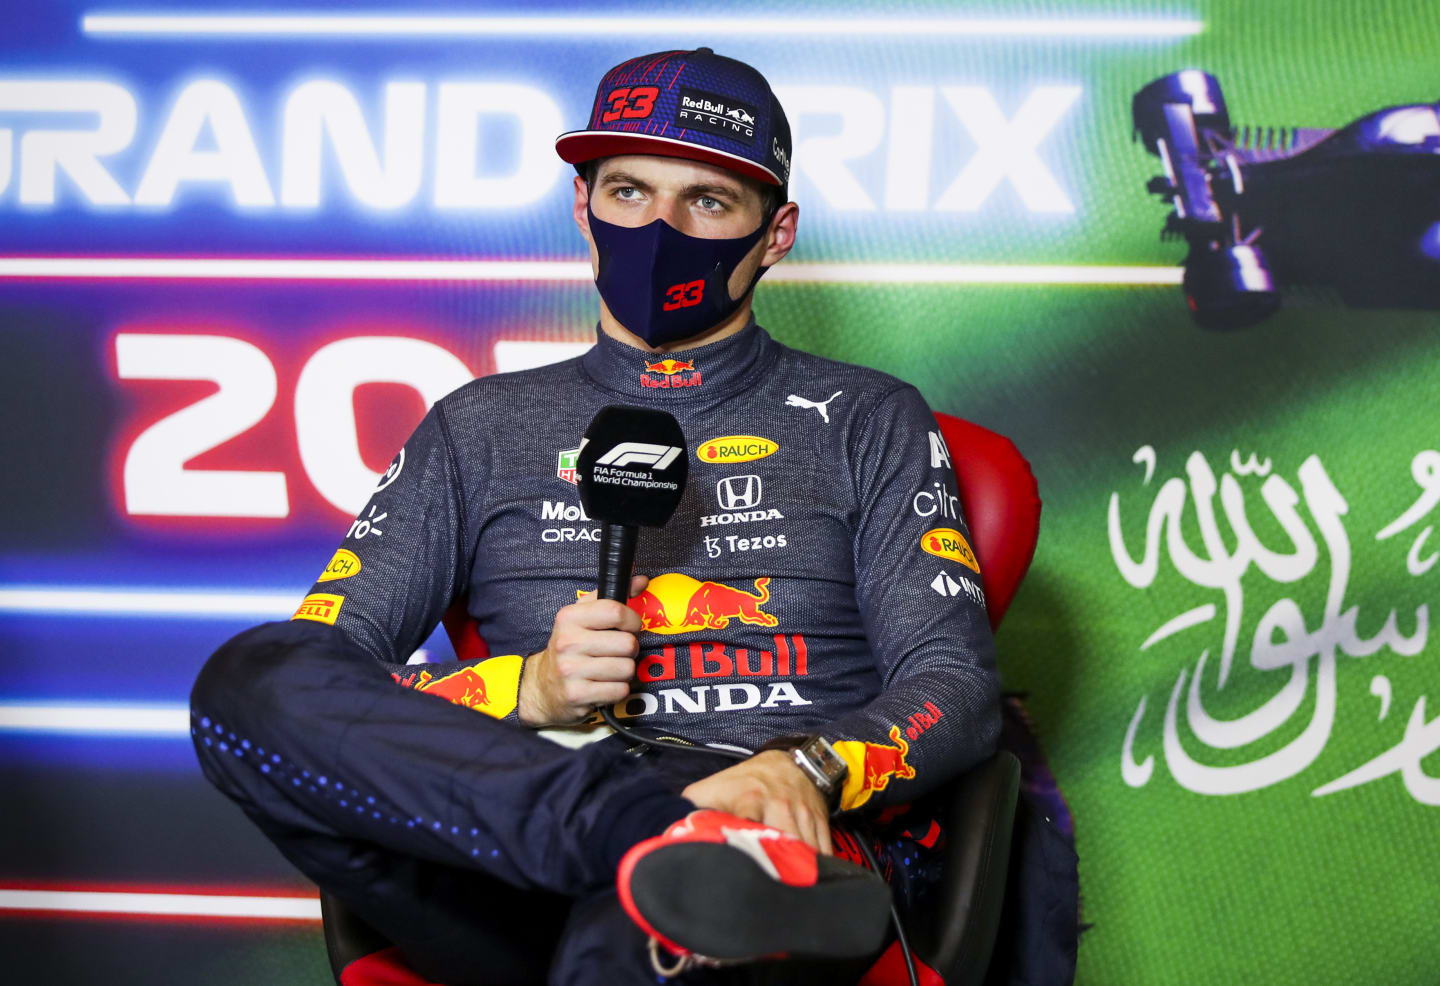 JEDDAH, SAUDI ARABIA - DECEMBER 04: Max Verstappen of Netherlands and Red Bull Racing talks in the press conference after qualifying ahead of the F1 Grand Prix of Saudi Arabia at Jeddah Corniche Circuit on December 04, 2021 in Jeddah, Saudi Arabia. (Photo by Florent Gooden - Pool/Getty Images)